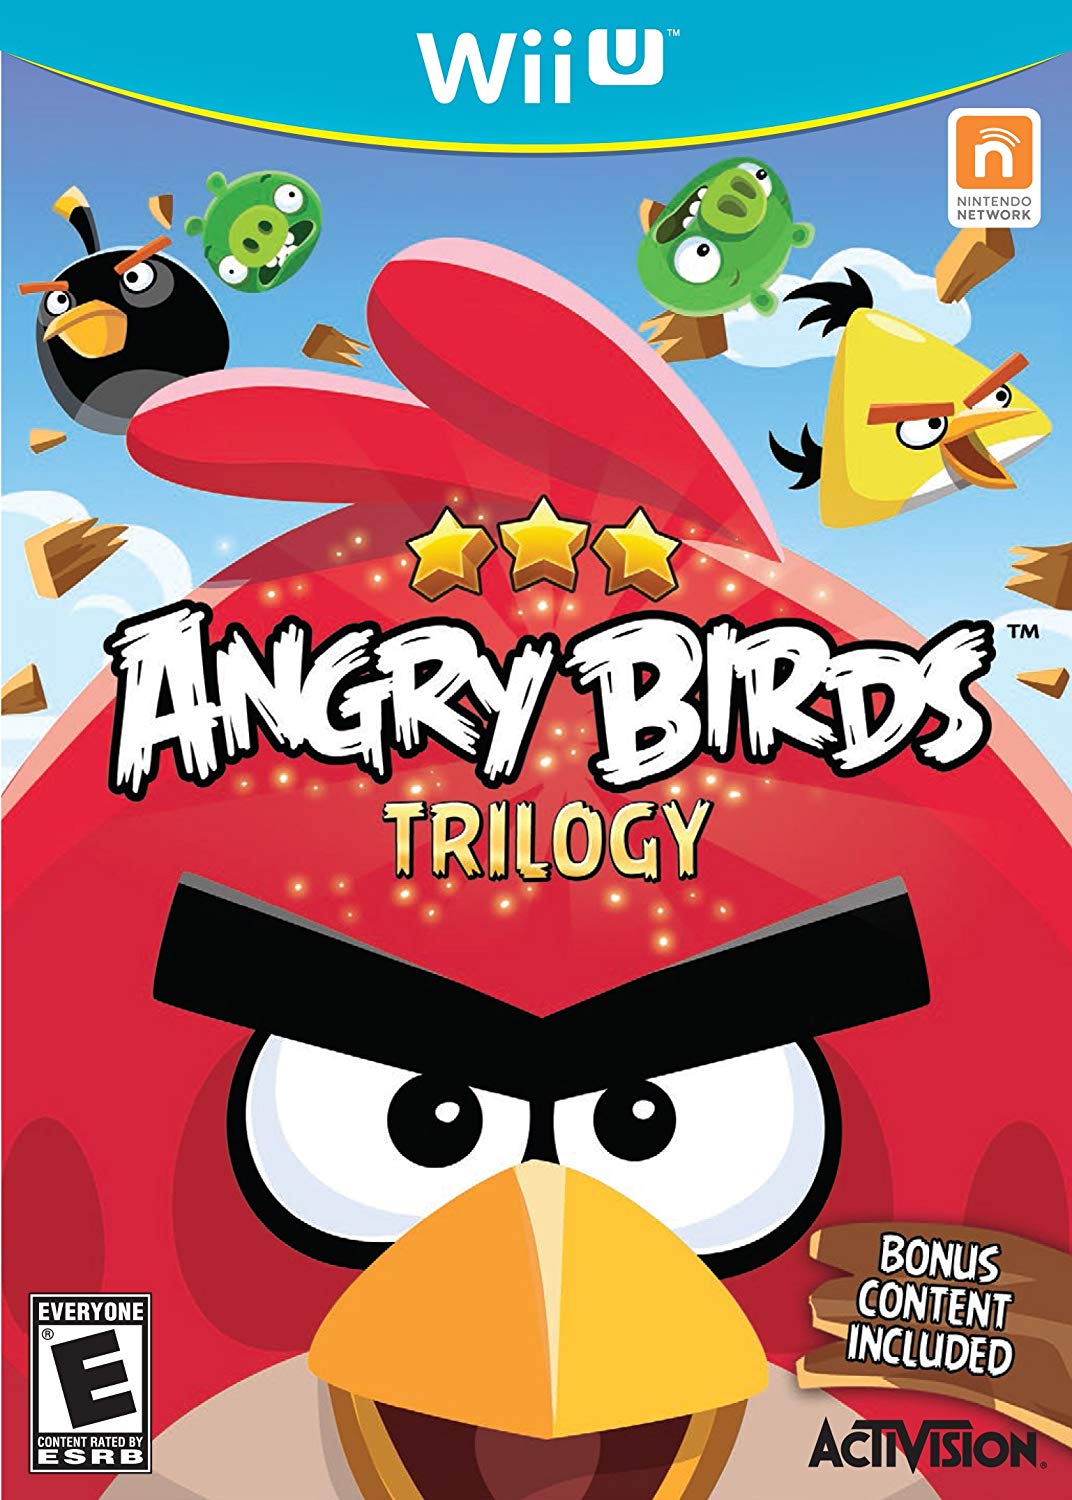 WIIU: ANGRY BIRDS TRILOGY (NM) (COMPLETE)